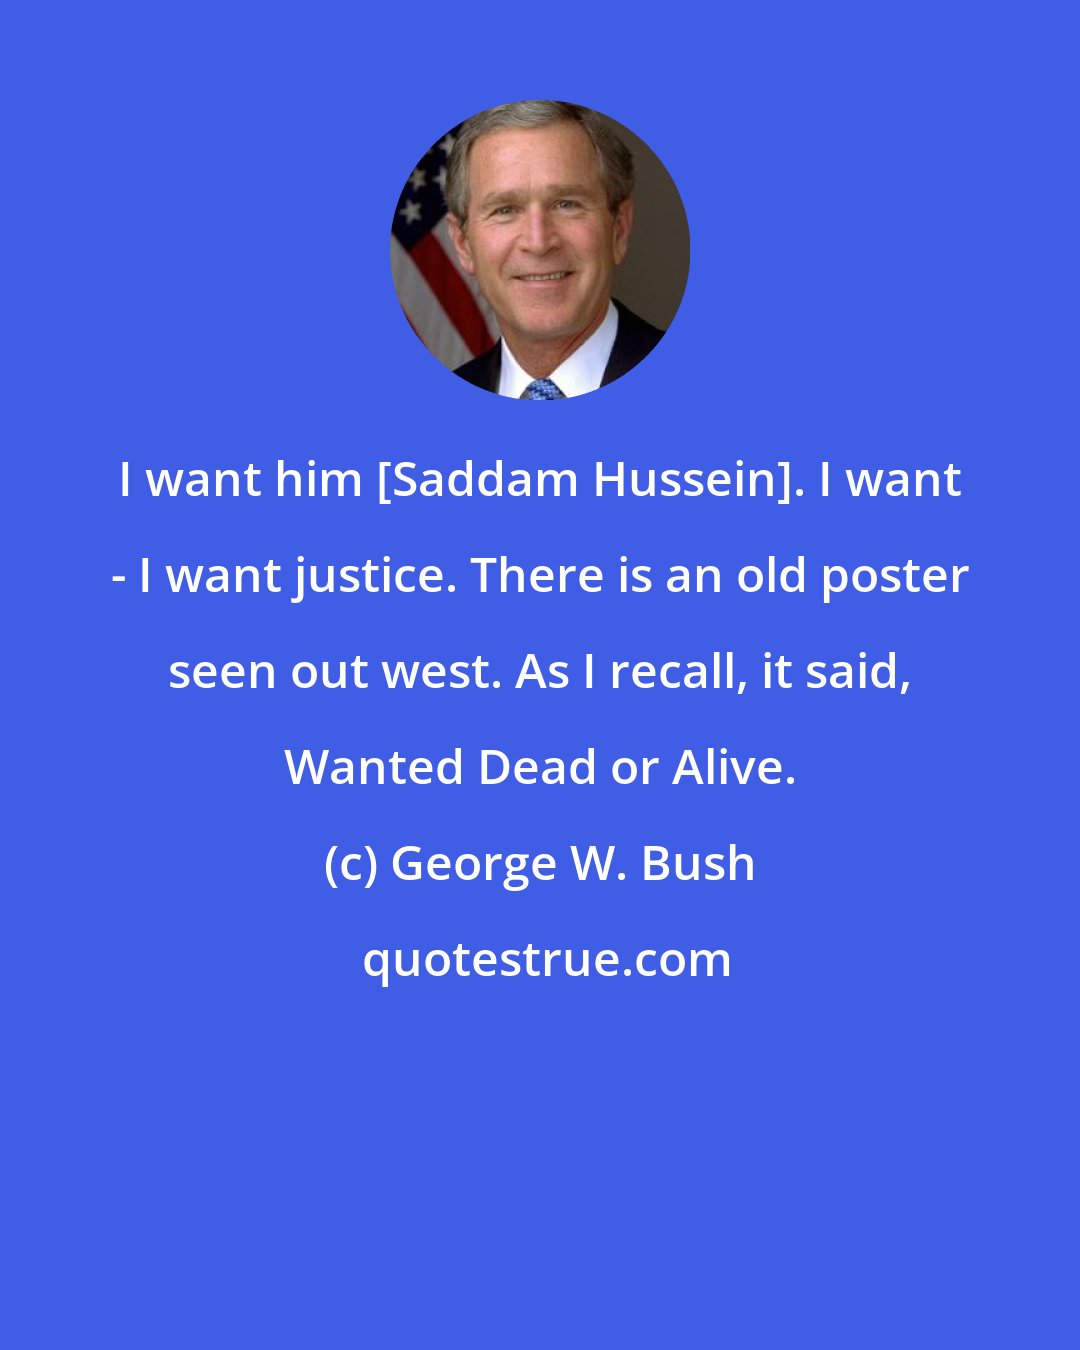 George W. Bush: I want him [Saddam Hussein]. I want - I want justice. There is an old poster seen out west. As I recall, it said, Wanted Dead or Alive.